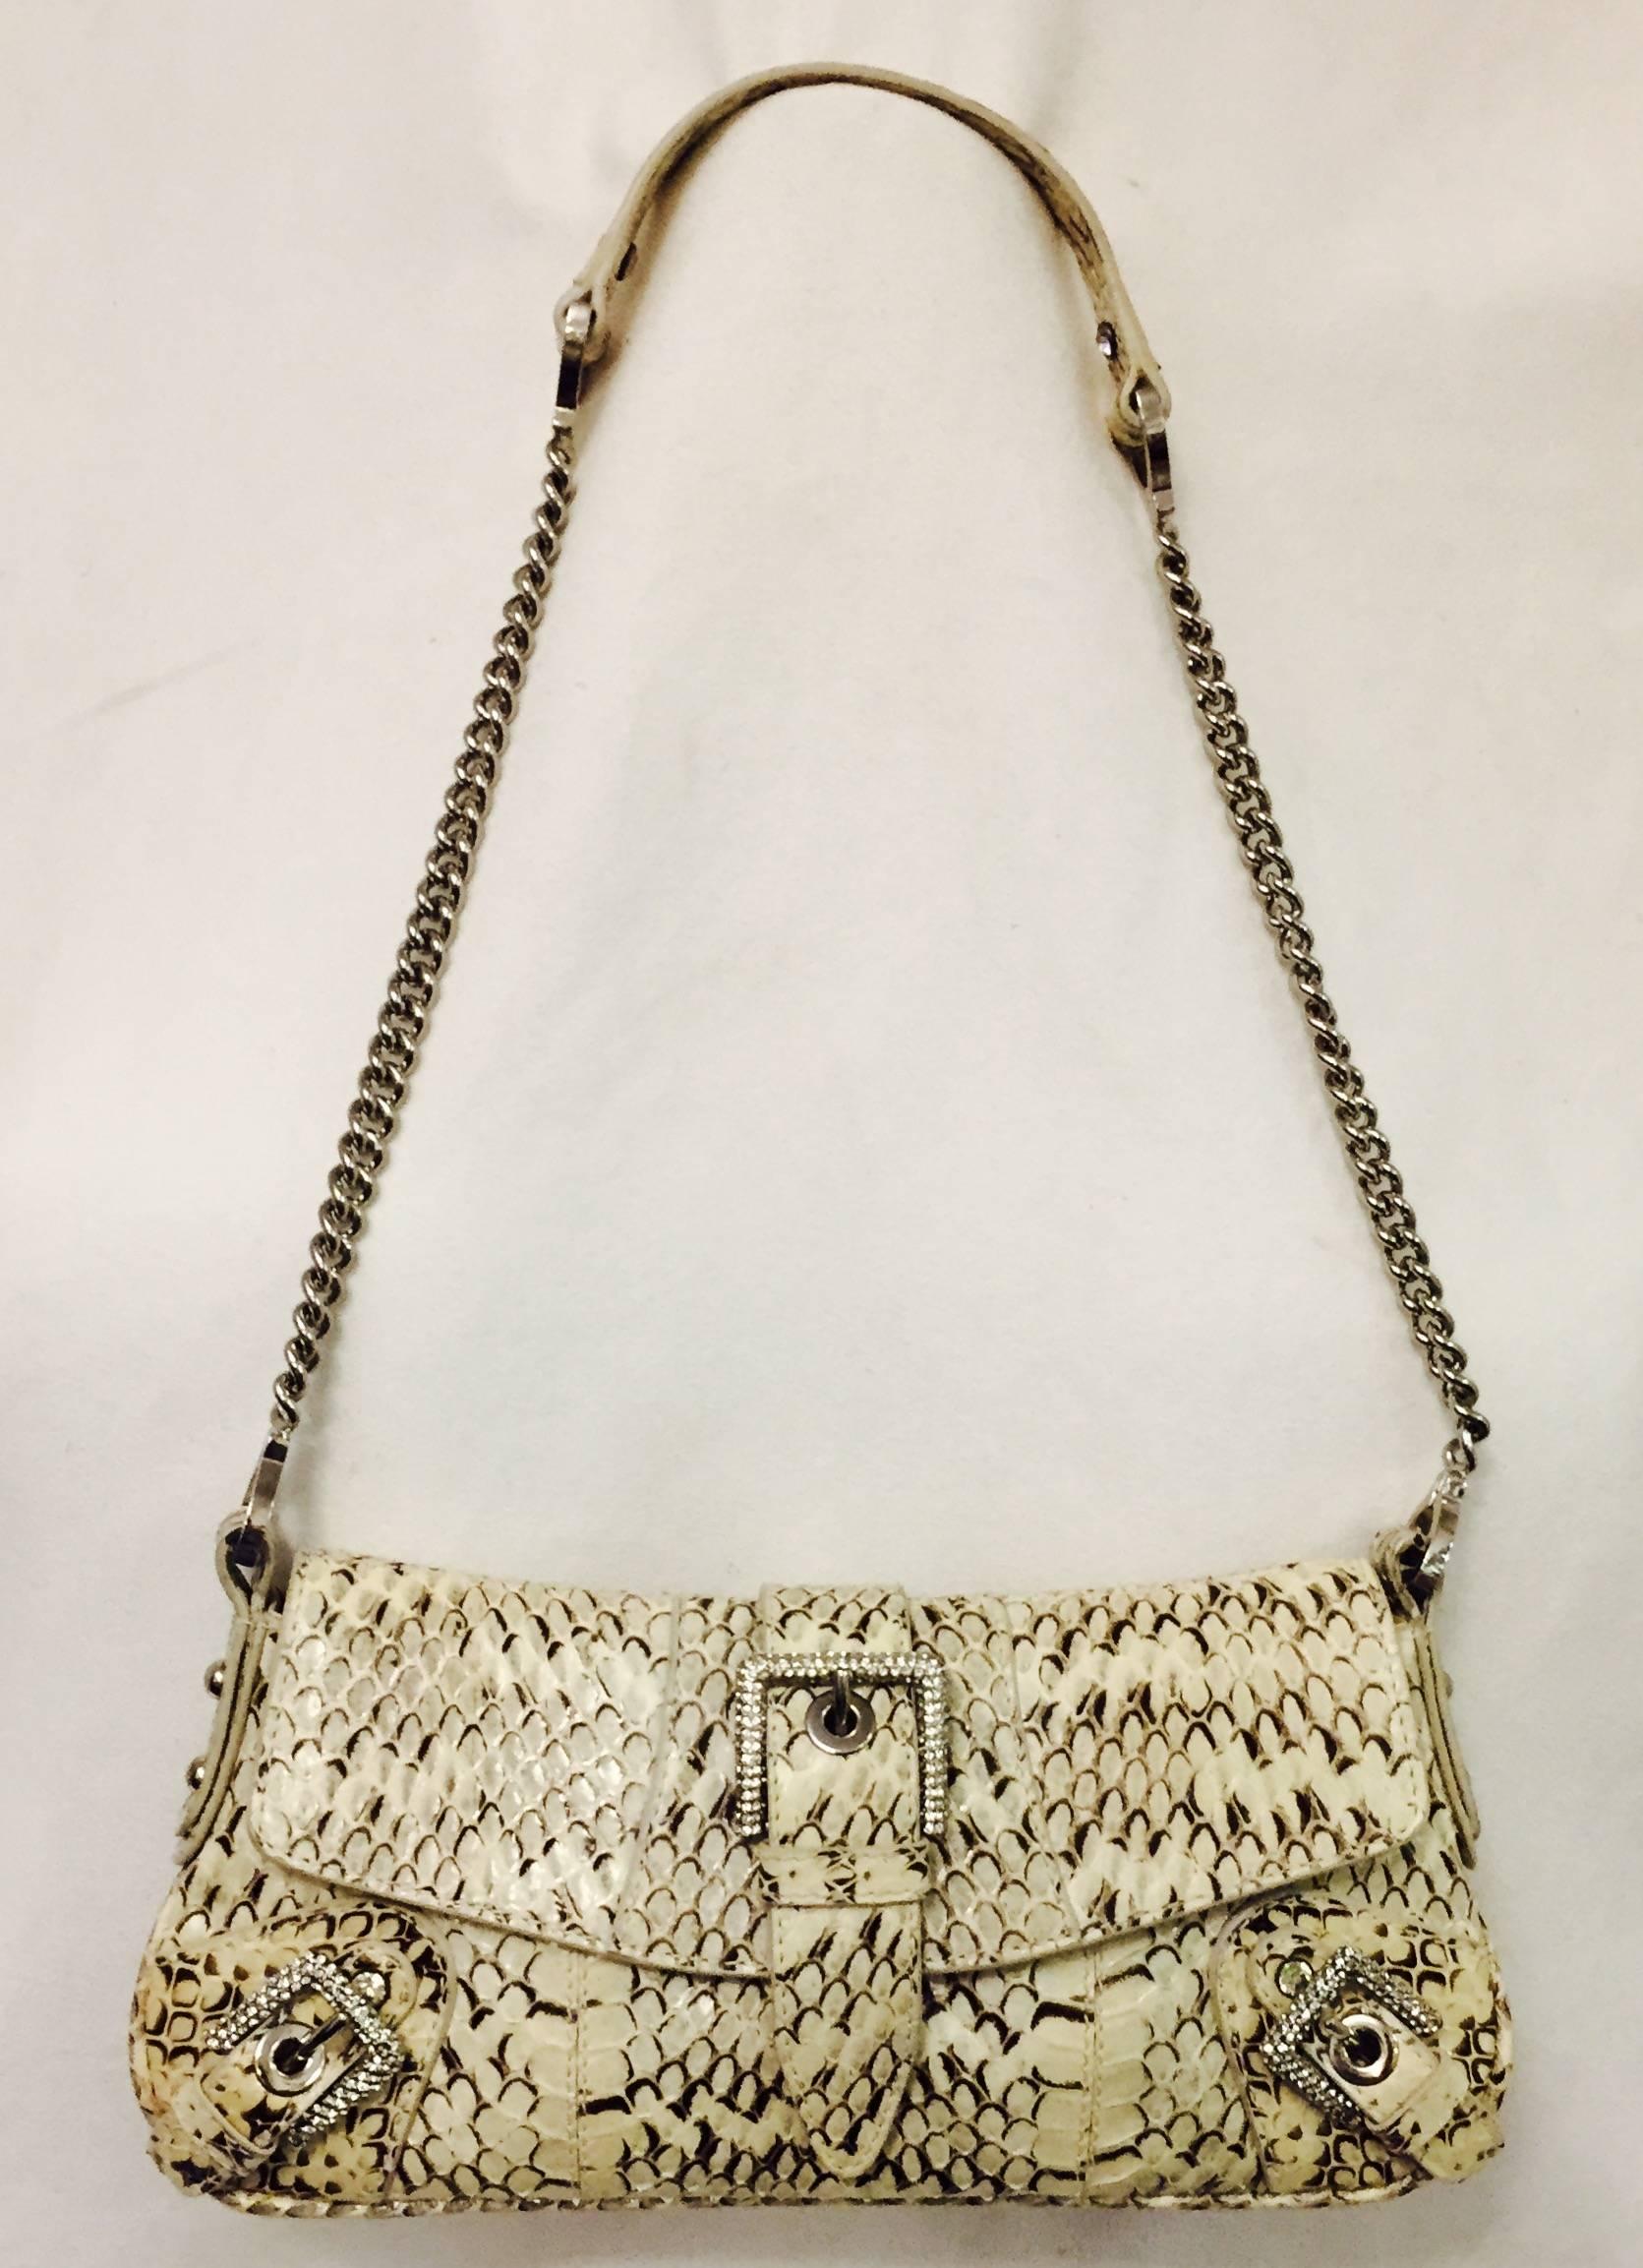 Deluxe Dolce & Gabbana Python Shoulder Bag easily transitions from day to evening!  Features ulra-luxurious snakeskin, expandable body, flap front and silver tone hardware including chain strap.  Dazzling crystal buckles on both corners and a larger